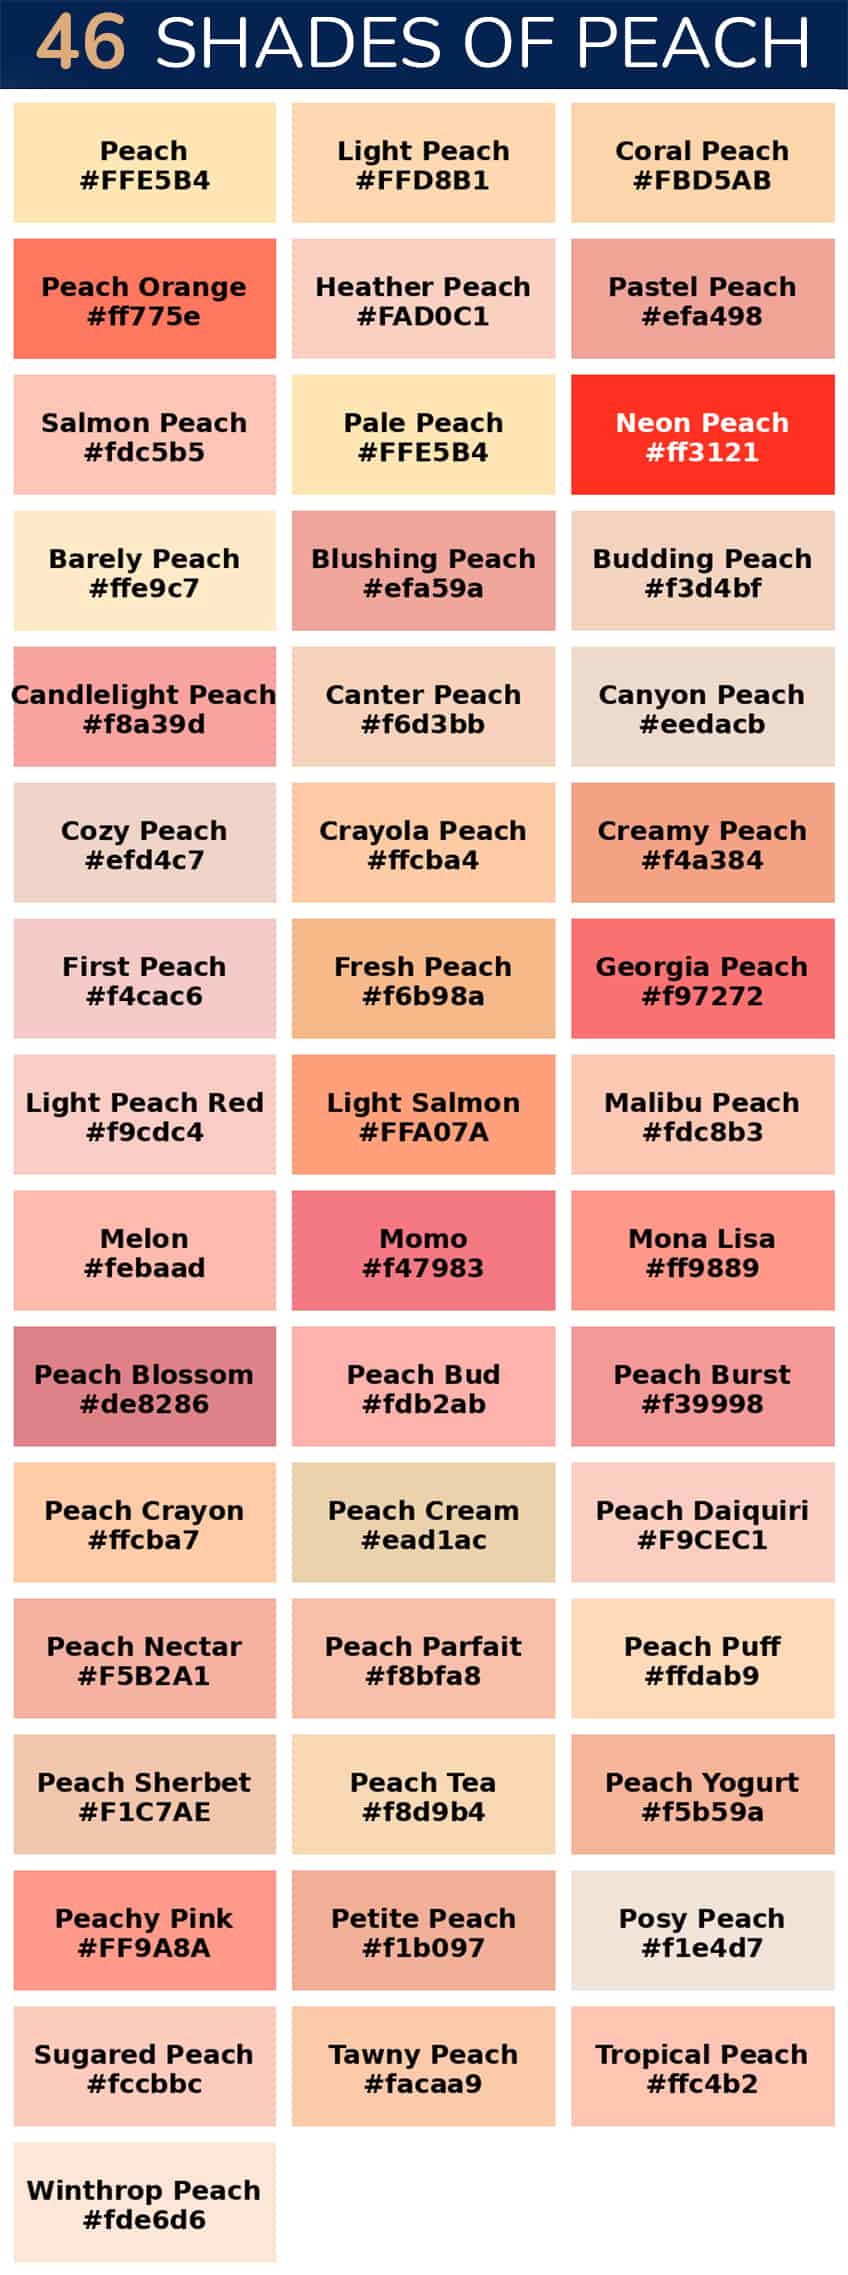 Rose beige  Peach, Opaque stain, Color